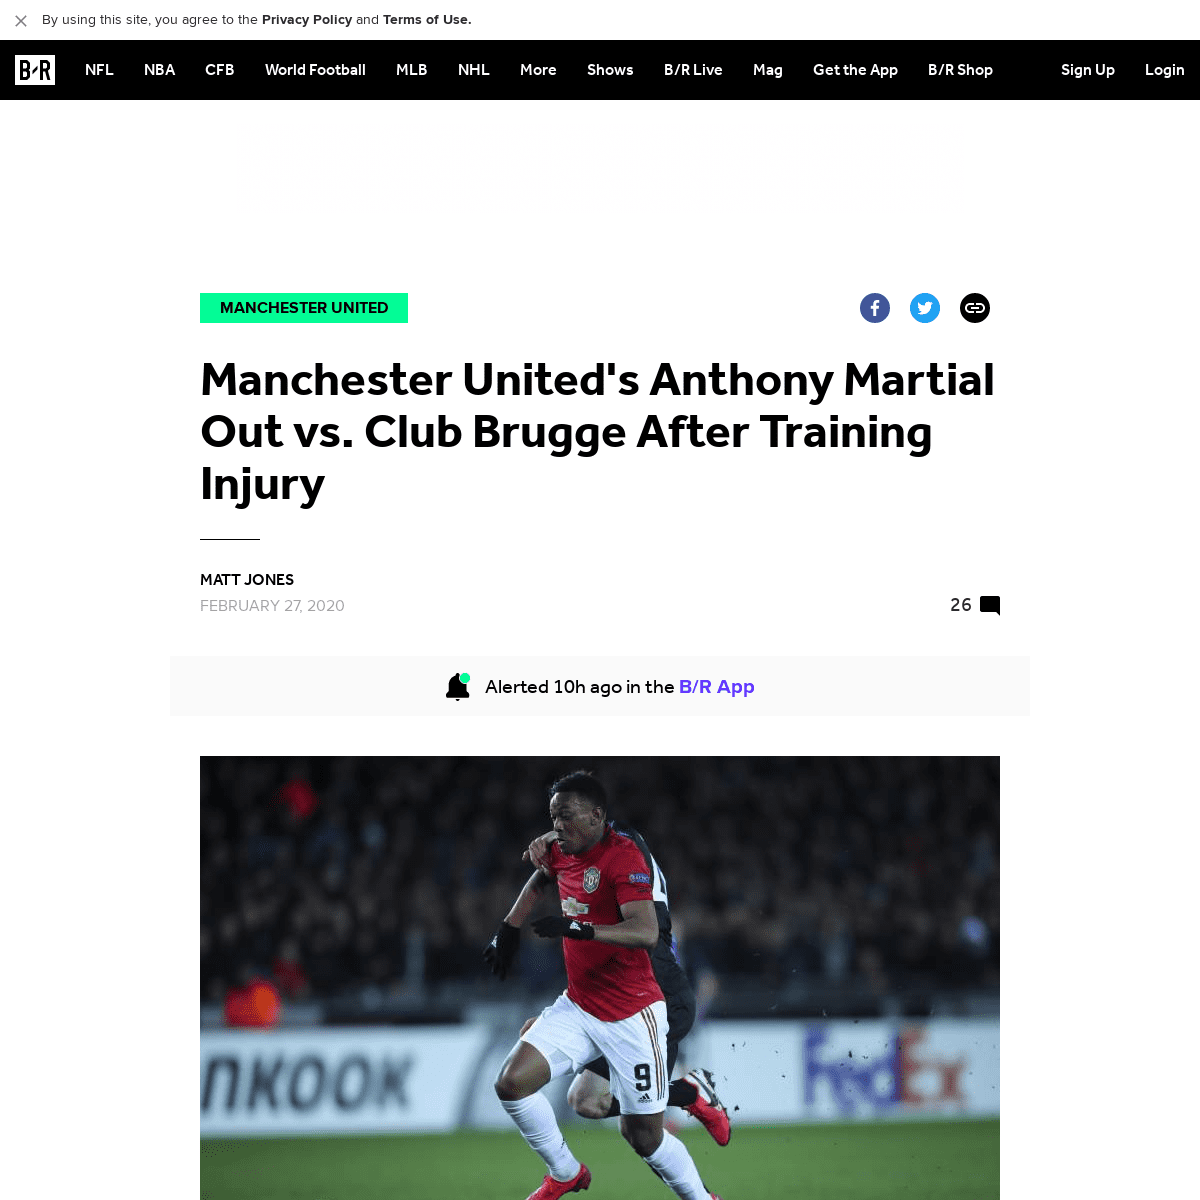 A complete backup of bleacherreport.com/articles/2808976-manchester-uniteds-anthony-martial-out-vs-club-brugge-after-training-in